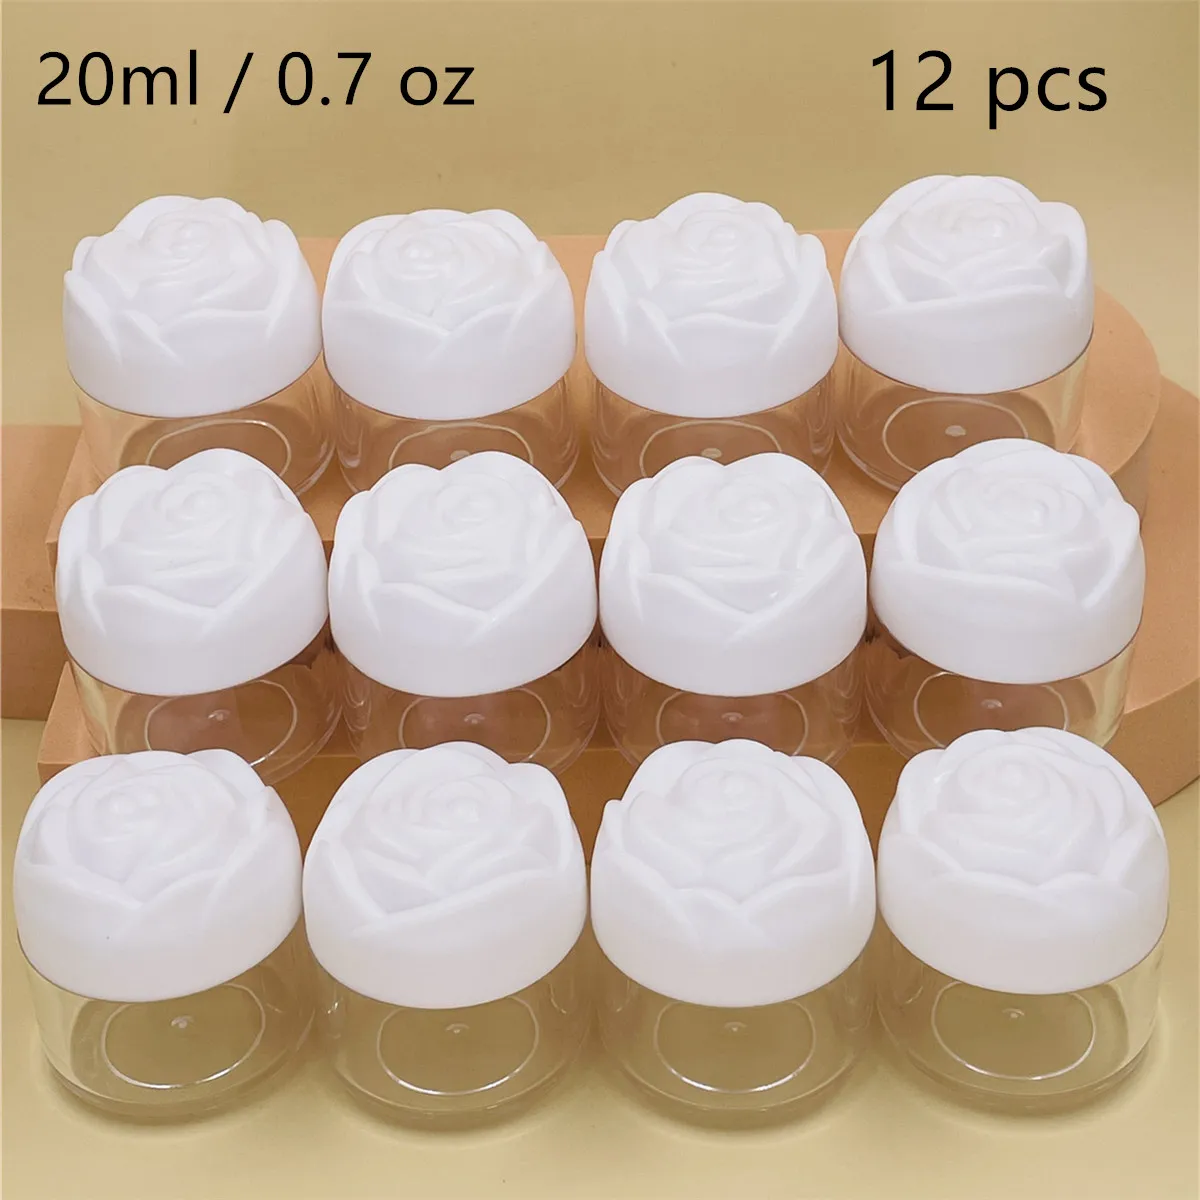 12PCS Wholesale of 20ML cosmetic dispensing bottles cream bottles, rose shaped wedding and holiday gift packaging